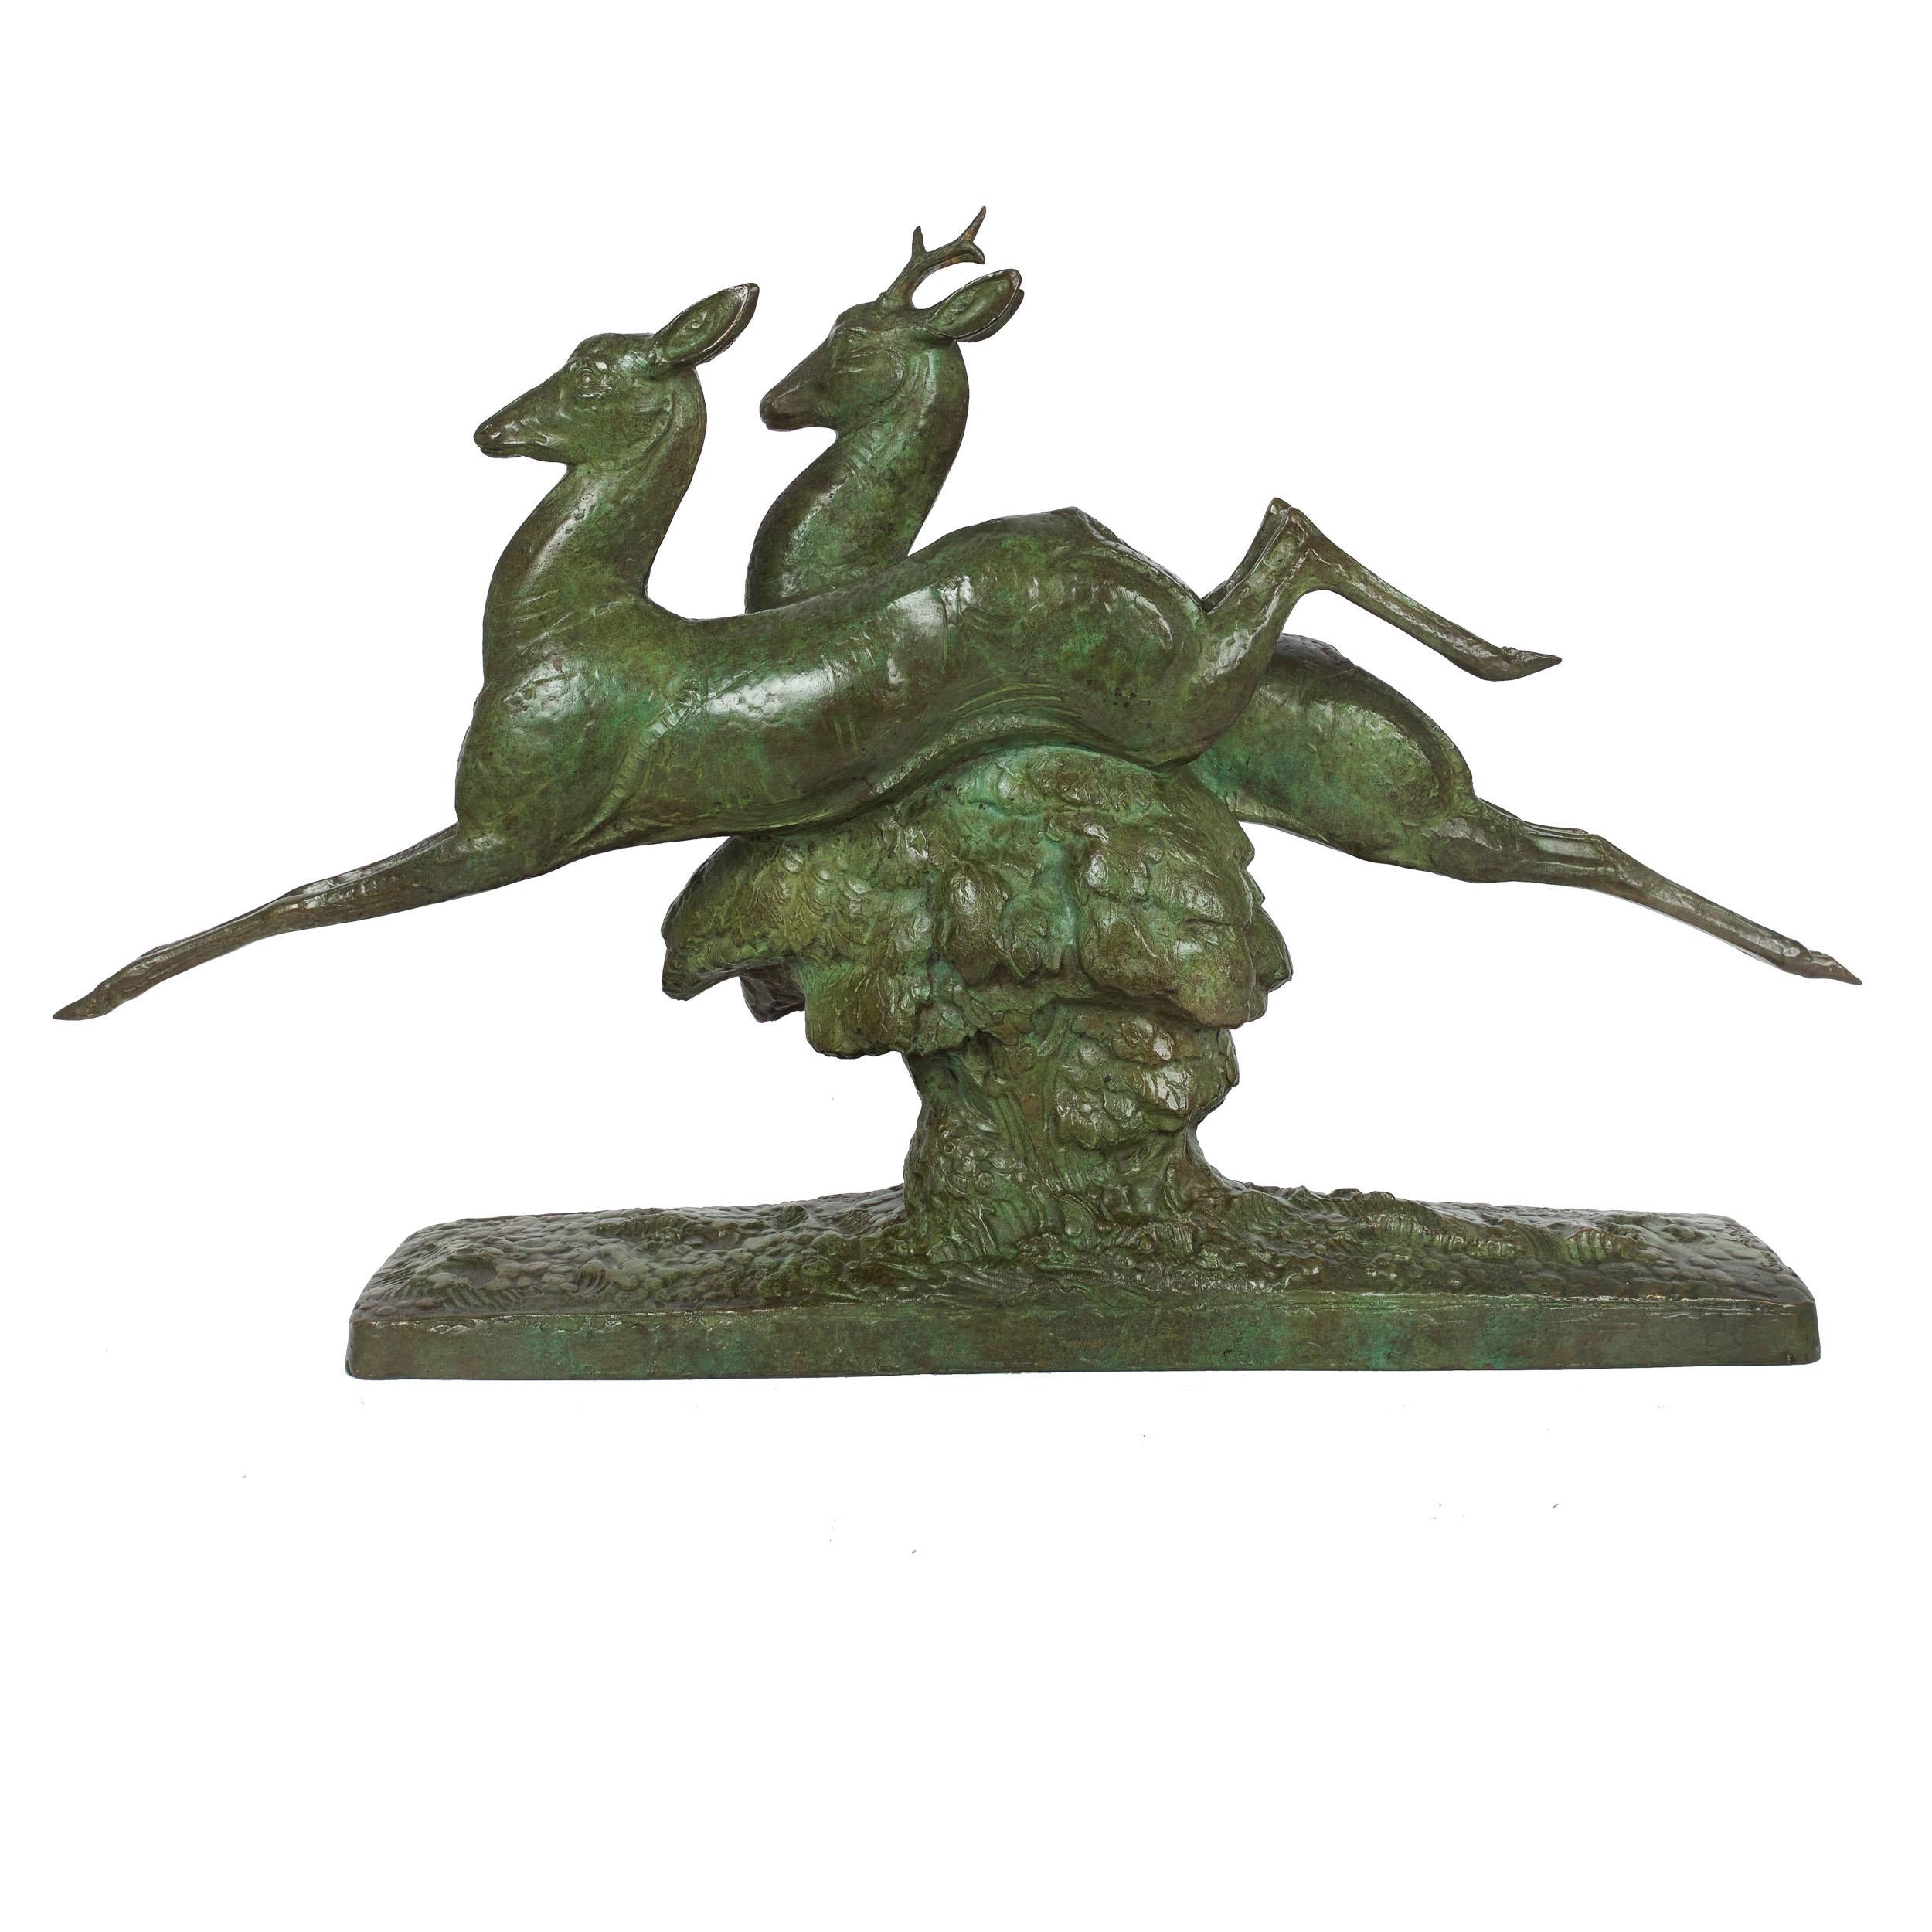 ANDRÉ-VINCENT BECQUEREL
French, 1893-1981

Leaping Stag and Hind

Verdigris patinated bronze  Signed 